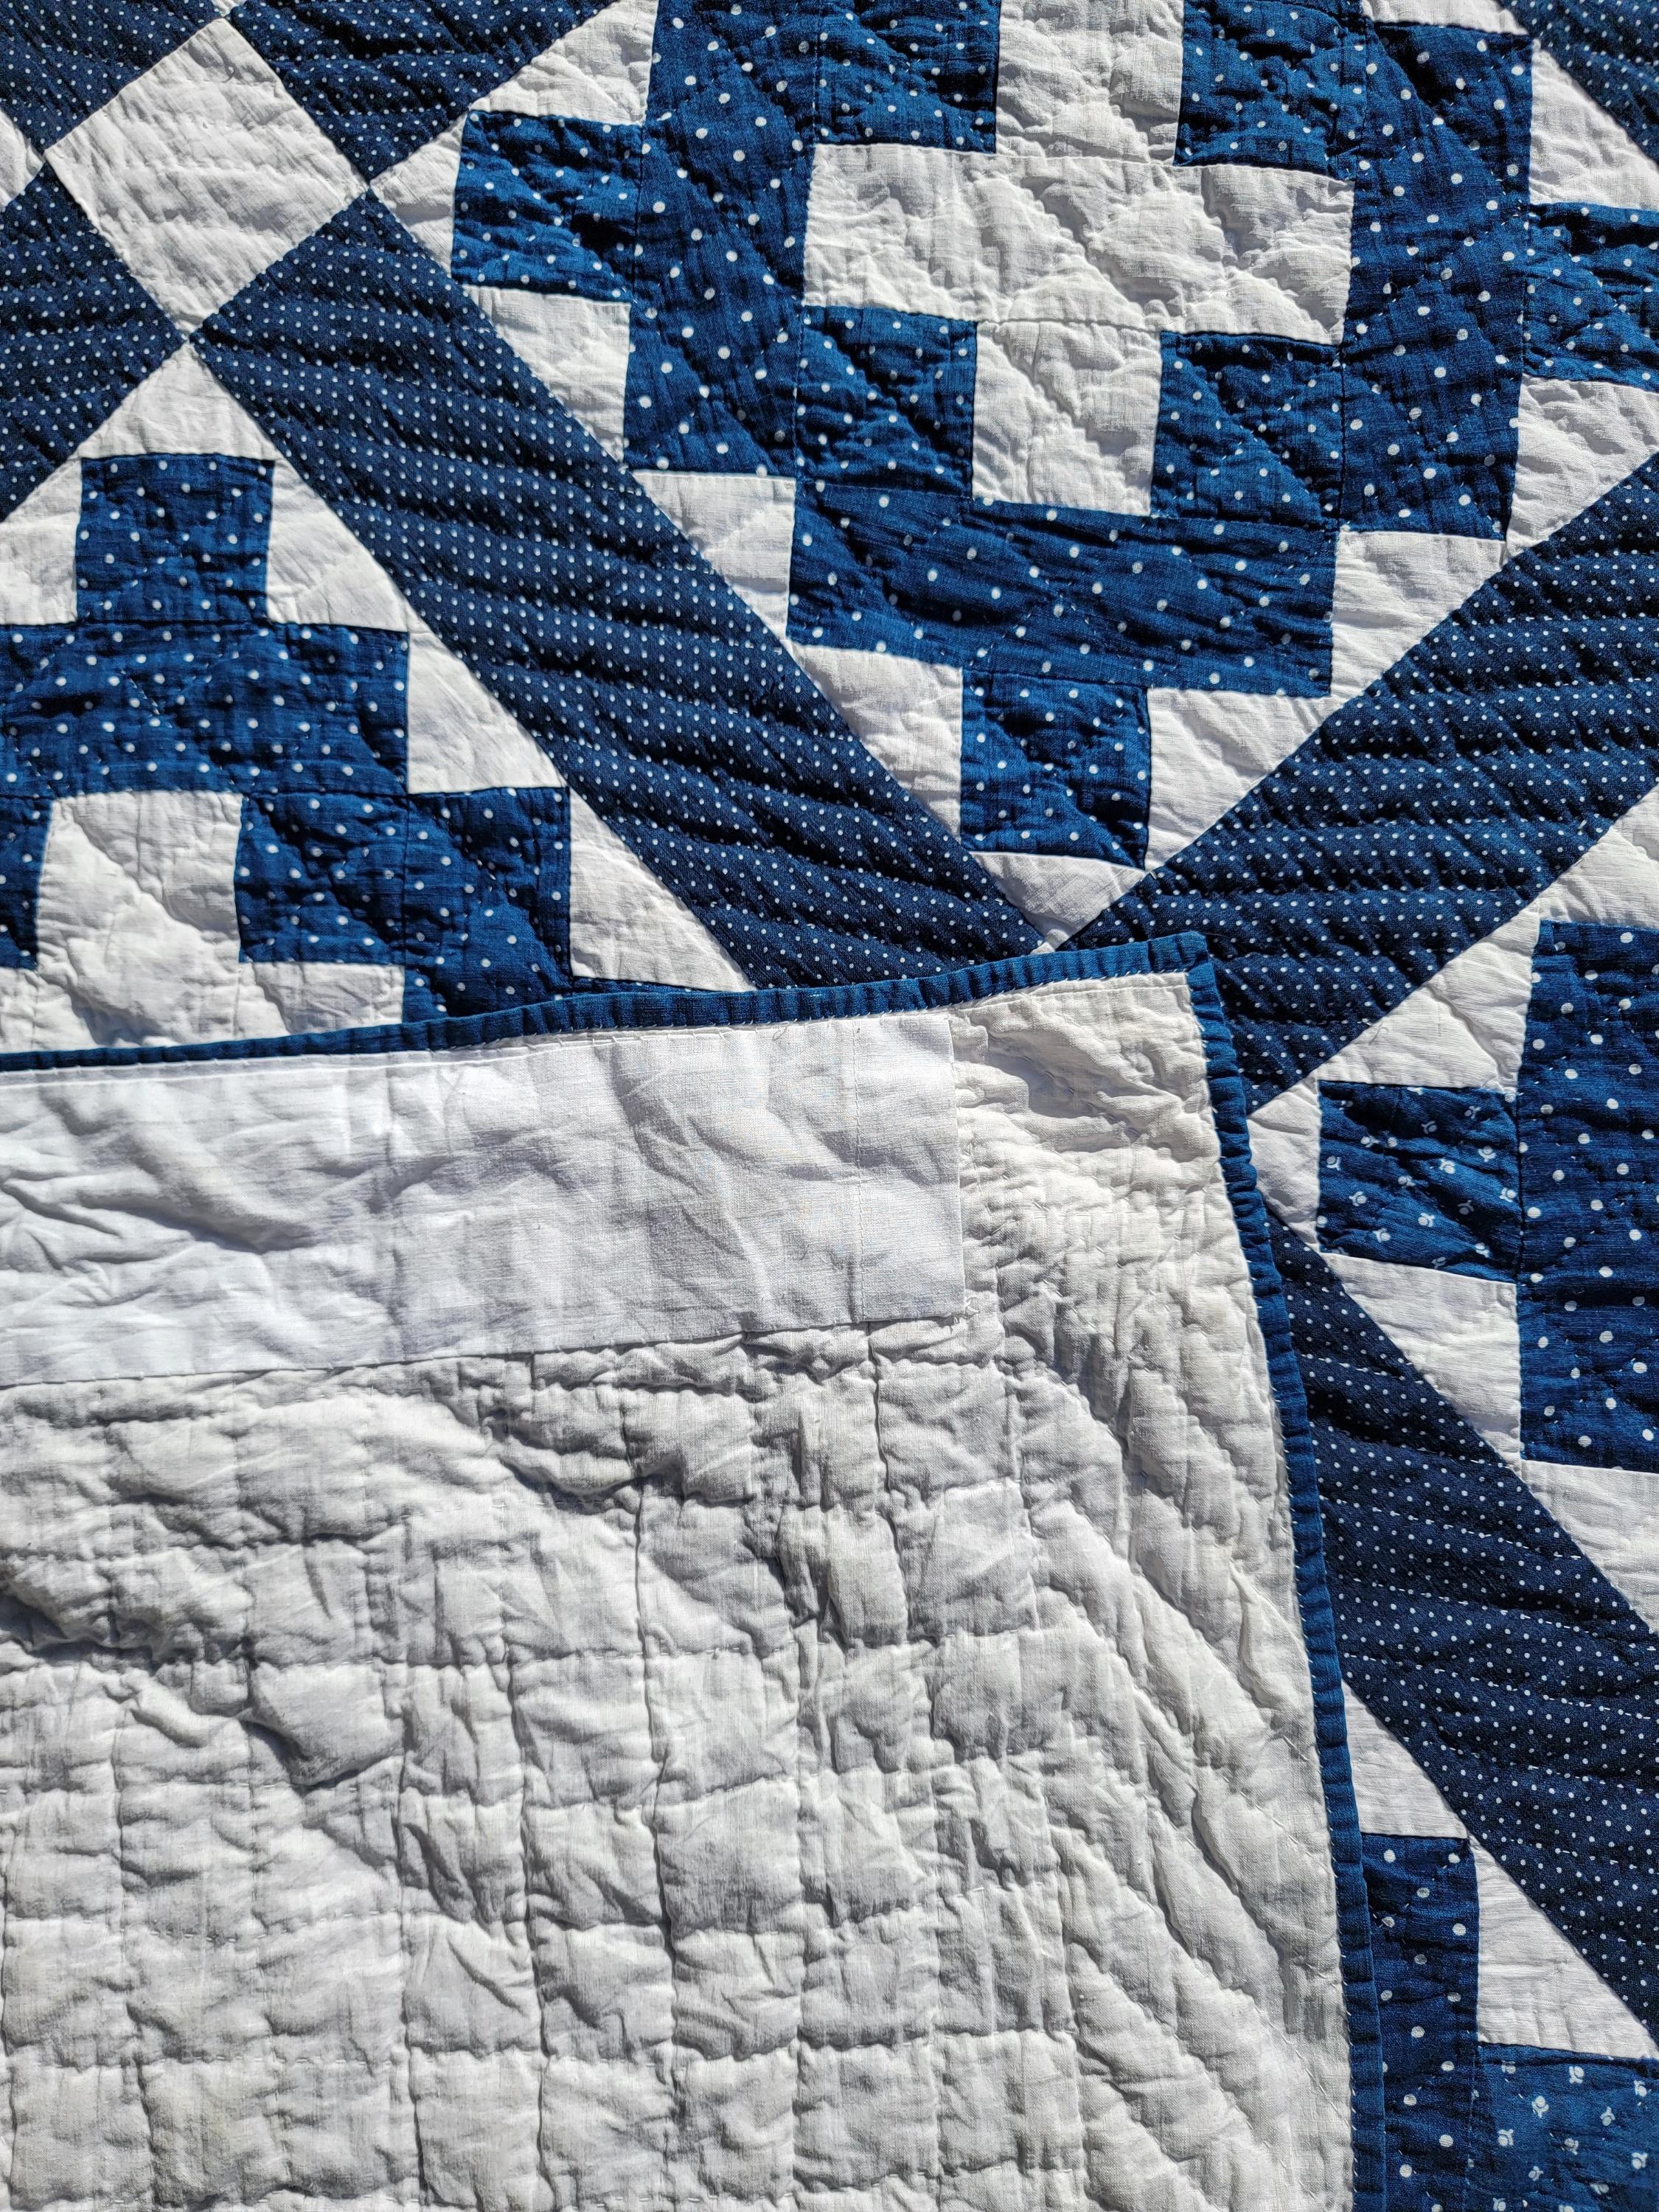 This fine 19thc indigo & white quilt was found in Pennsylvania and is in fine condition. The backing is in white cotton muslin.